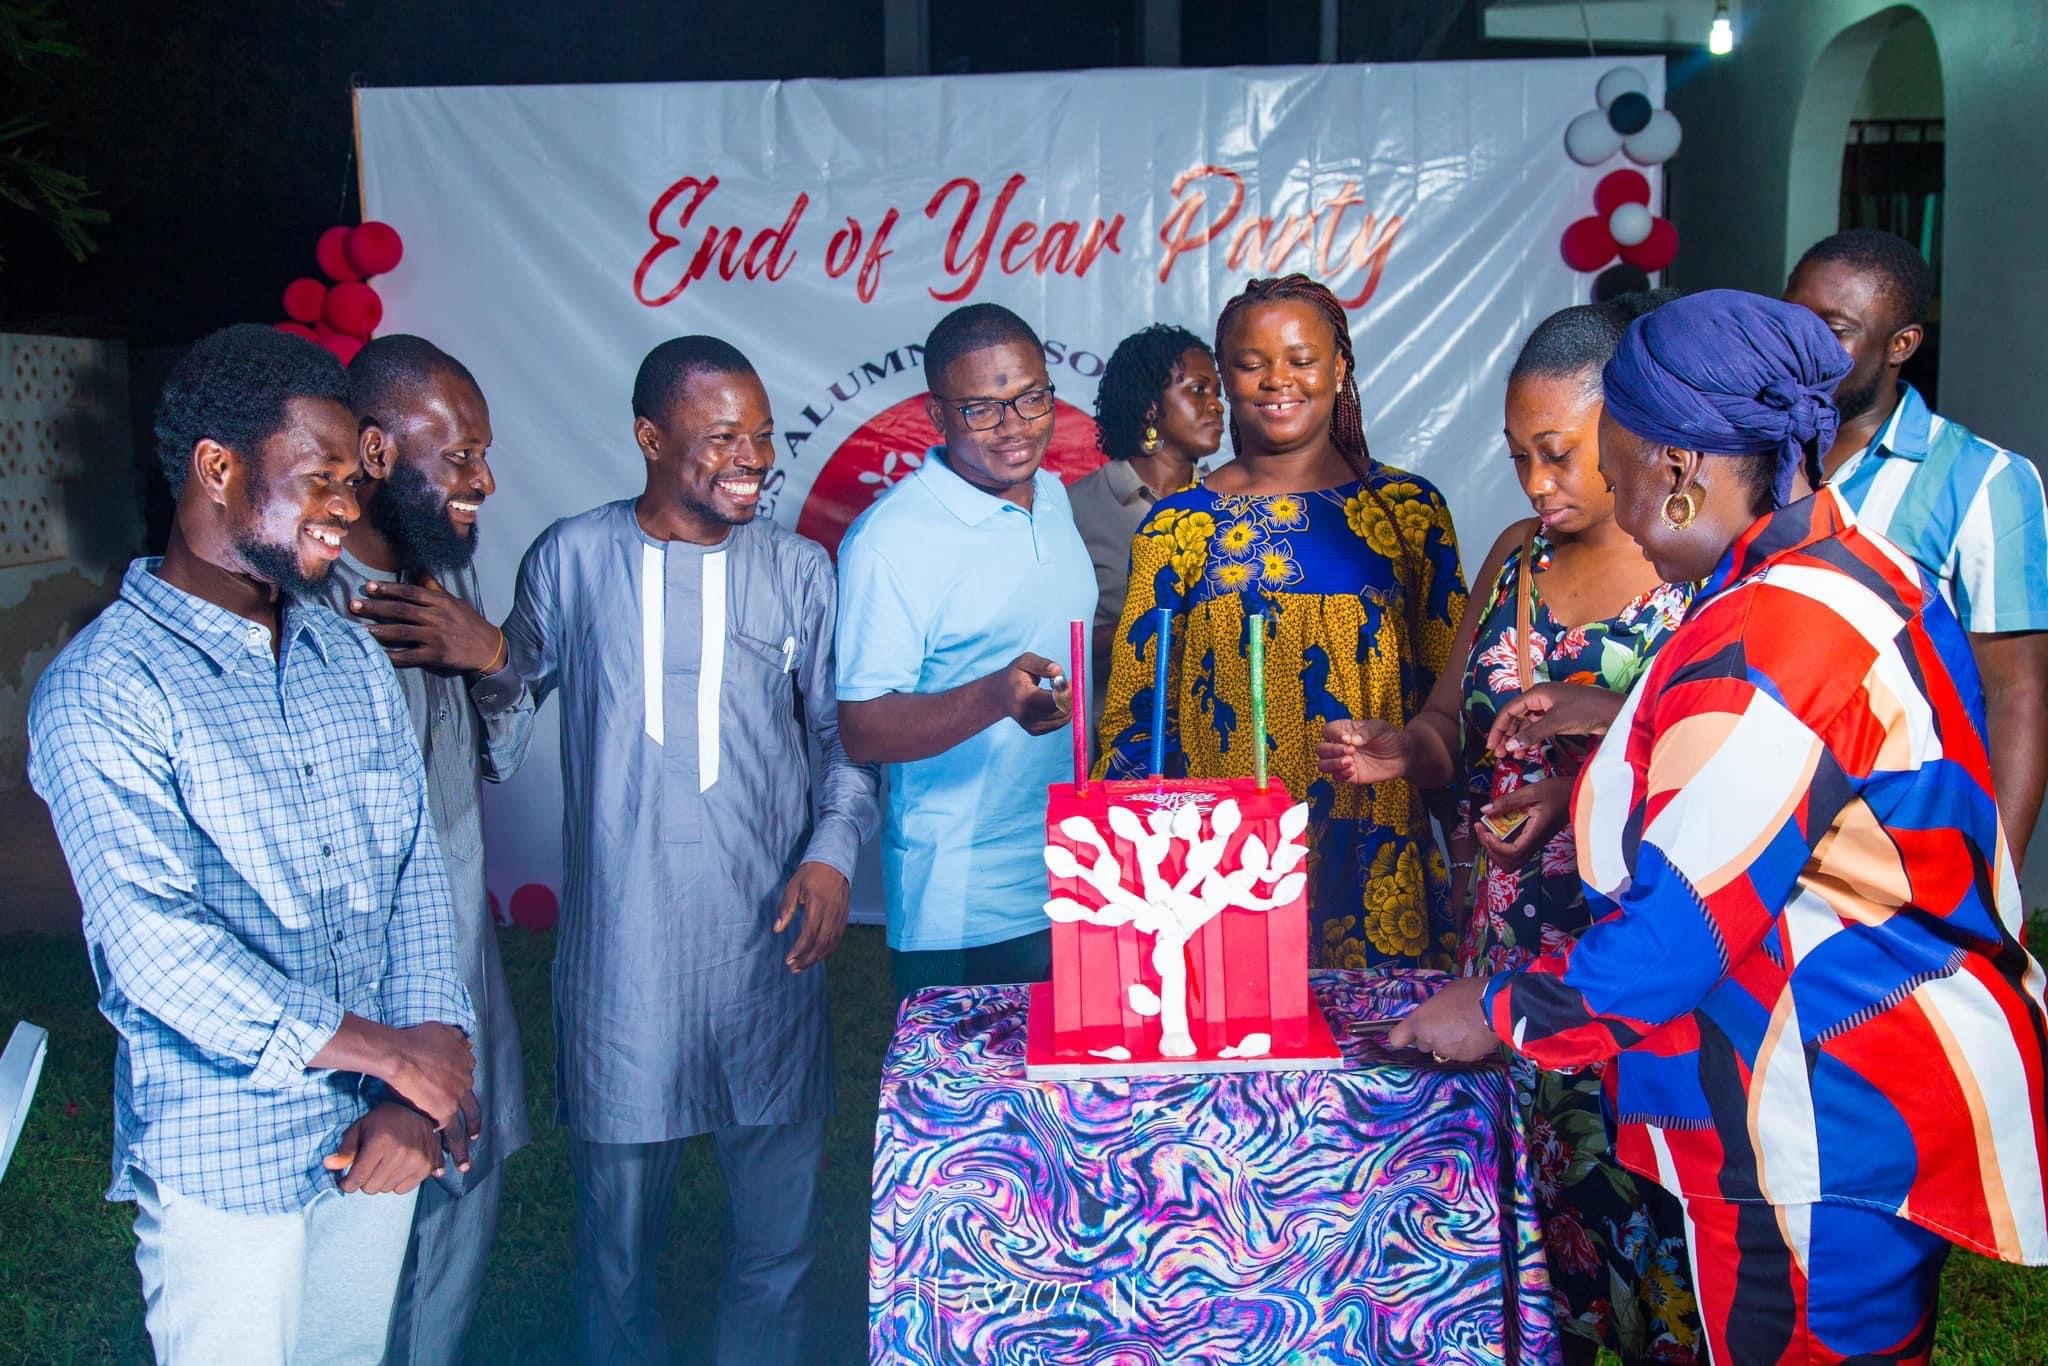 A Group Of People Smiling And Lighting Candles In Front A A Banner That Reads End Of Year Party